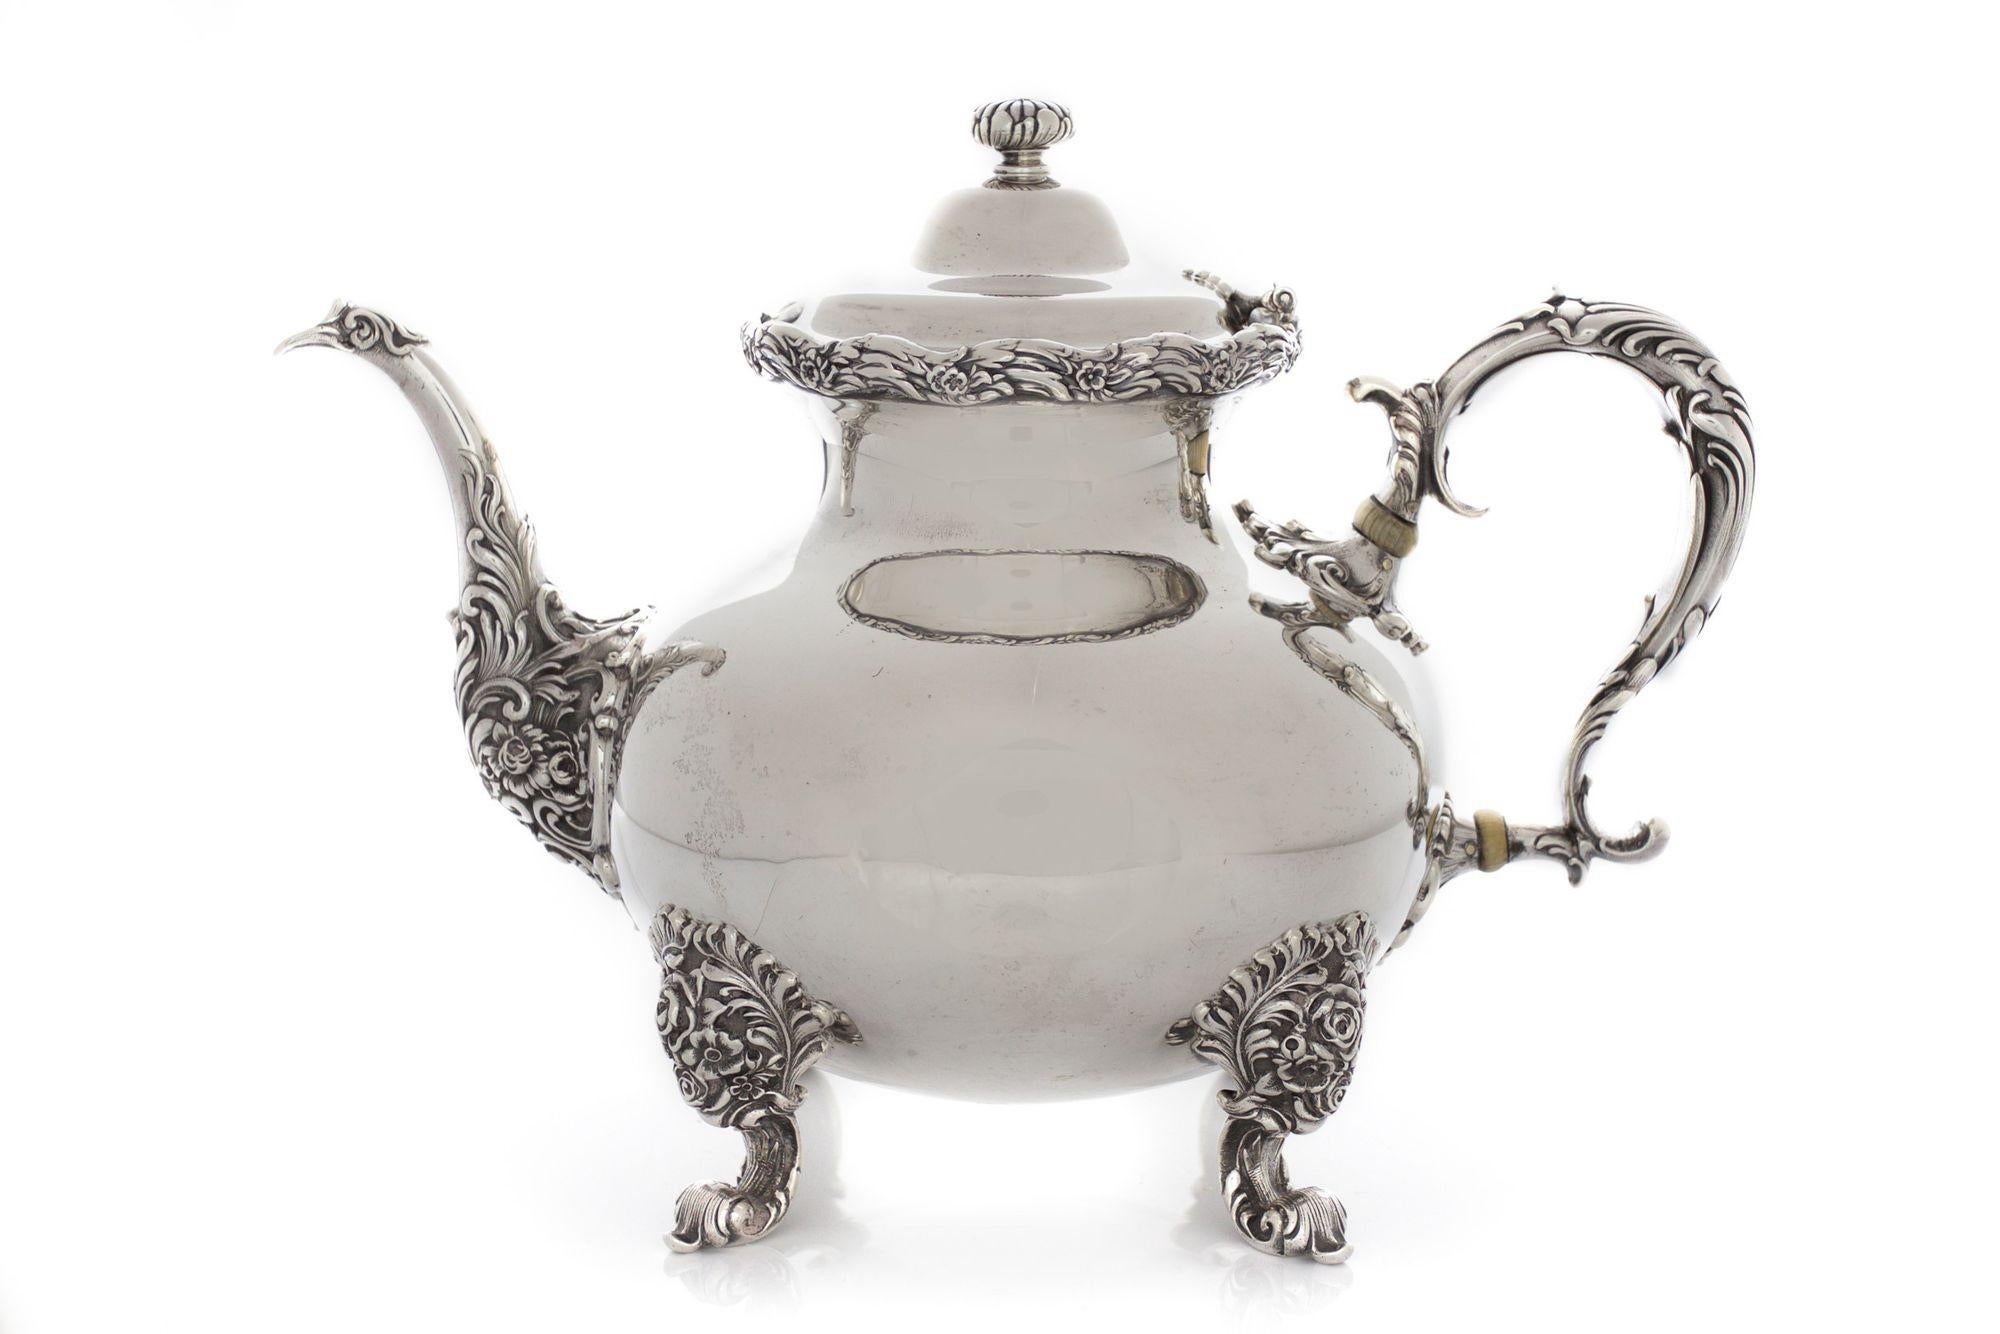 GEORGE III STYLE FIVE-PIECE STERLING SILVER COFFEE AND TEA SERVICE SET
By Whiting Manufacturing Co., New York; each with Whiting hallmark (two-headed chimera w/ encircled W), 